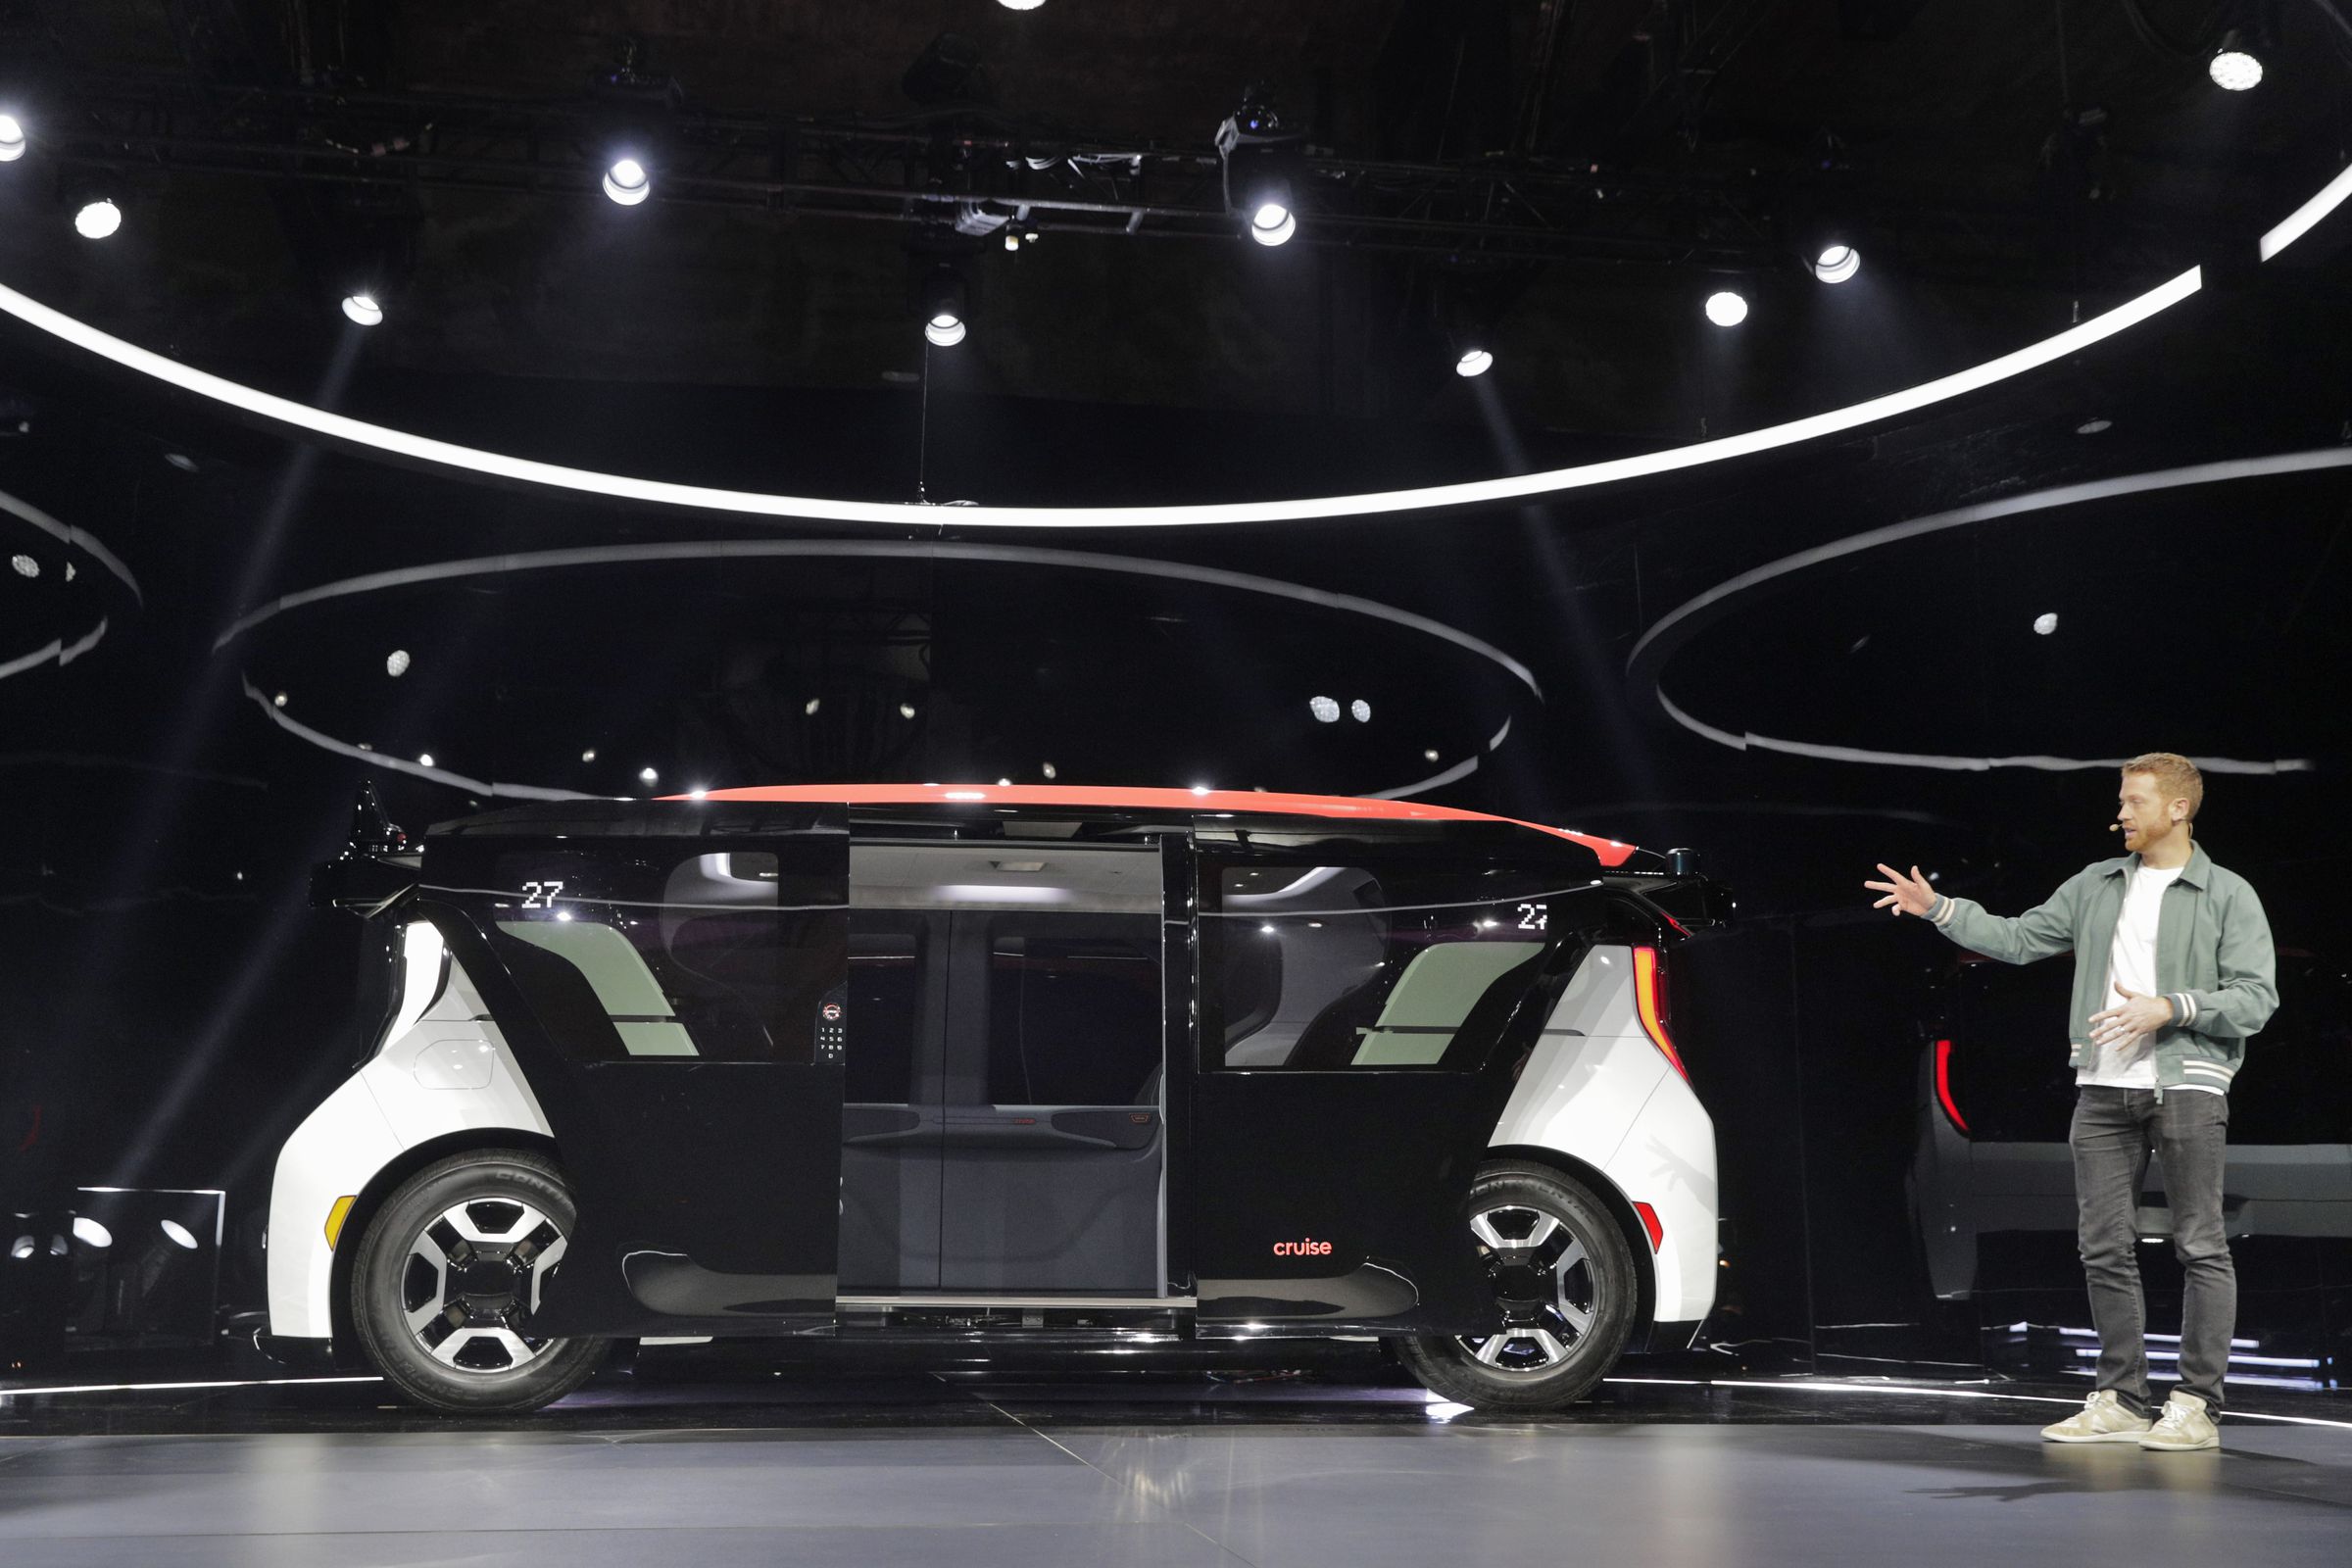 Kyle Vogt, speaks near the new Cruise Origin, at the unveiling of the new, fully autonomous passenger vehicle in San Francisco, Calif., on Tuesday, January 21, 2020